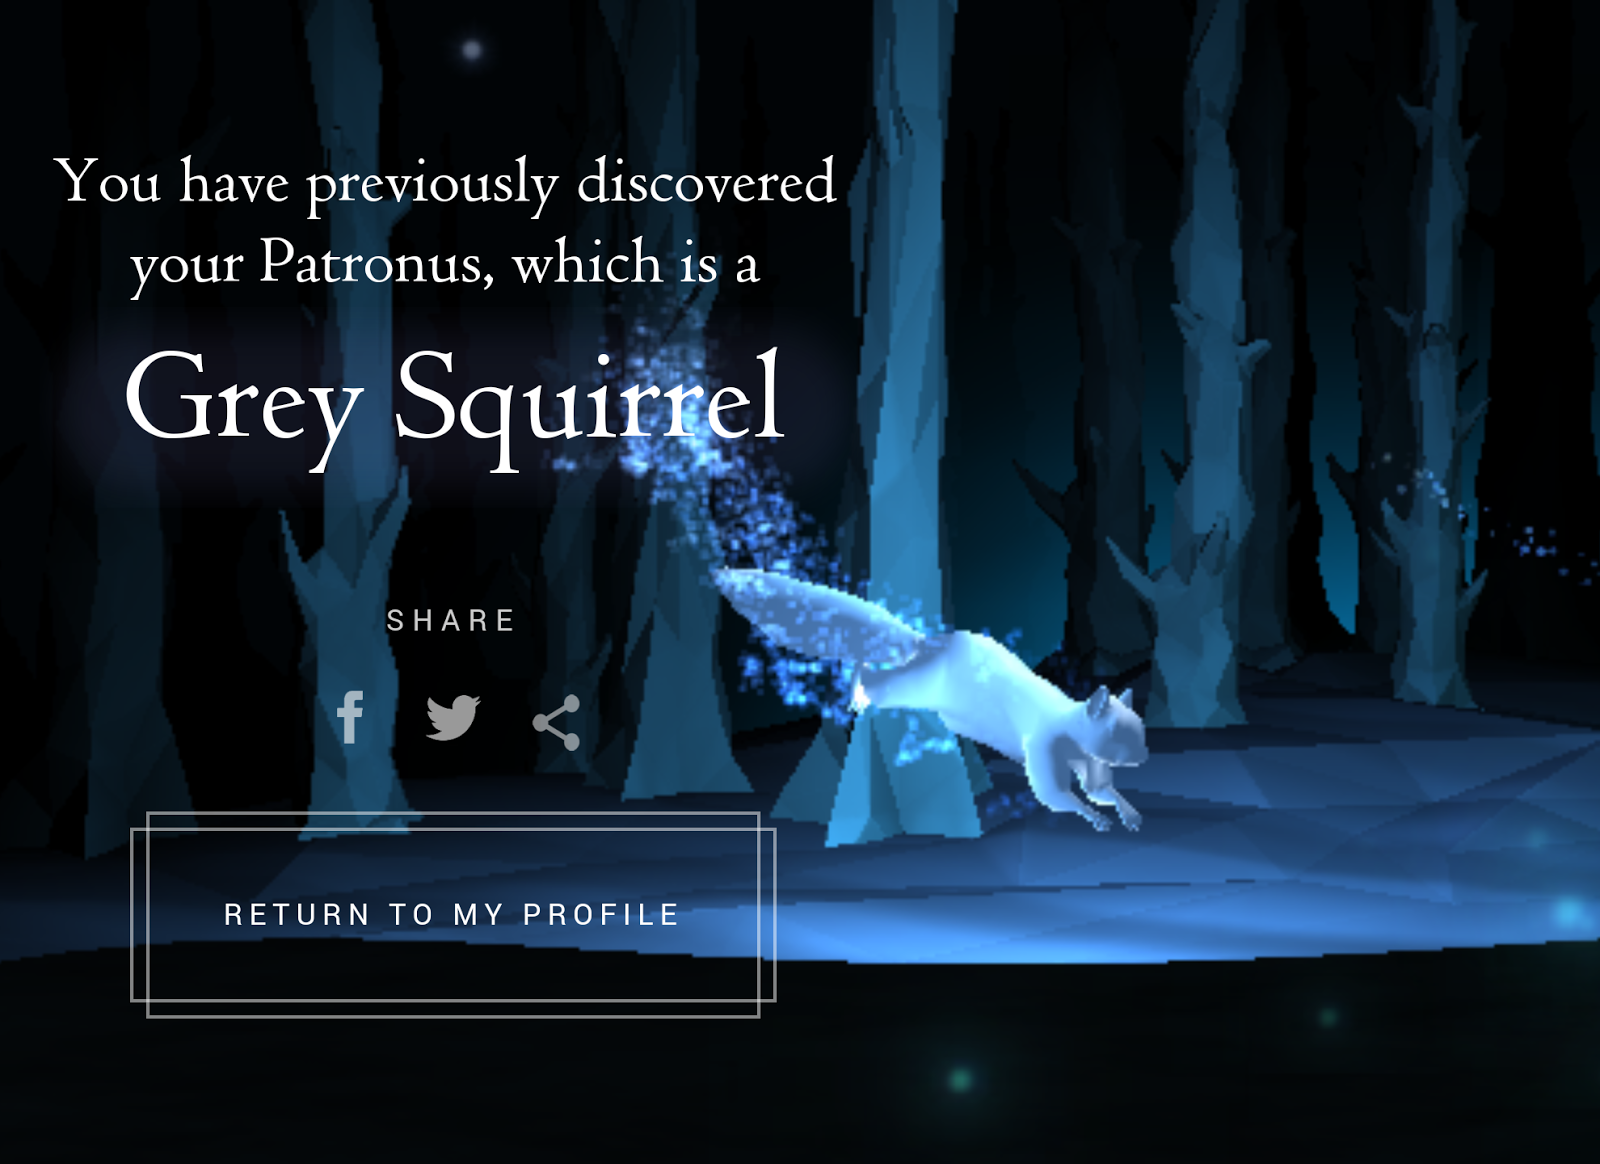 Hæderlig skille sig ud en kreditor Completely Indie: After All These Years I Finally Know My Patronus